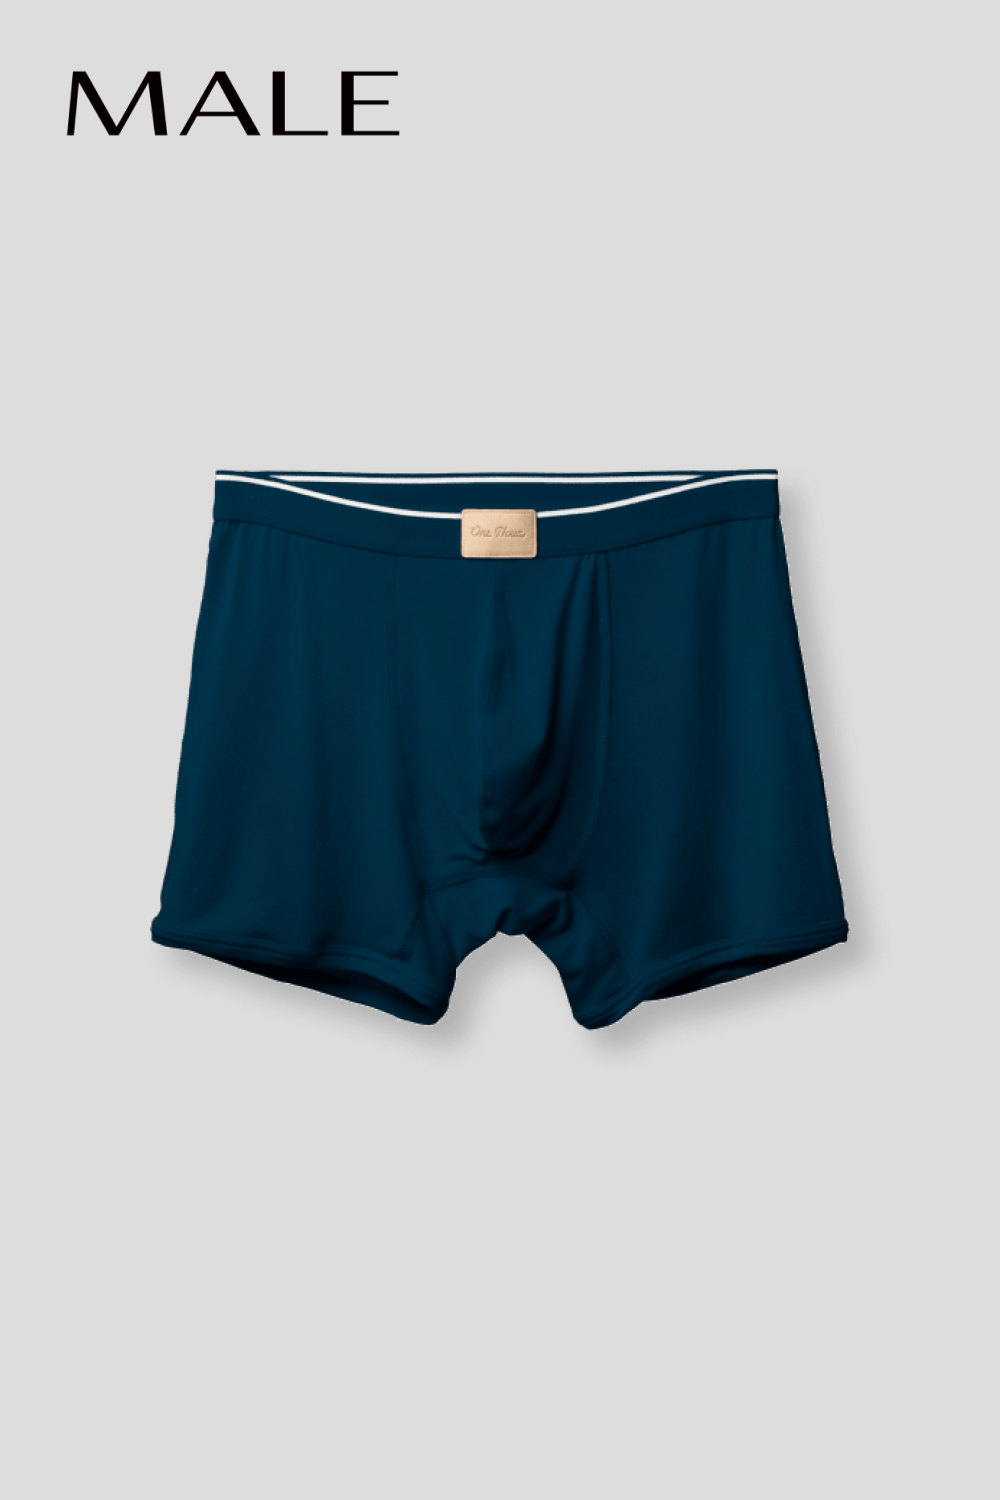 Worry Free 3D Boxer Brief (MALE)